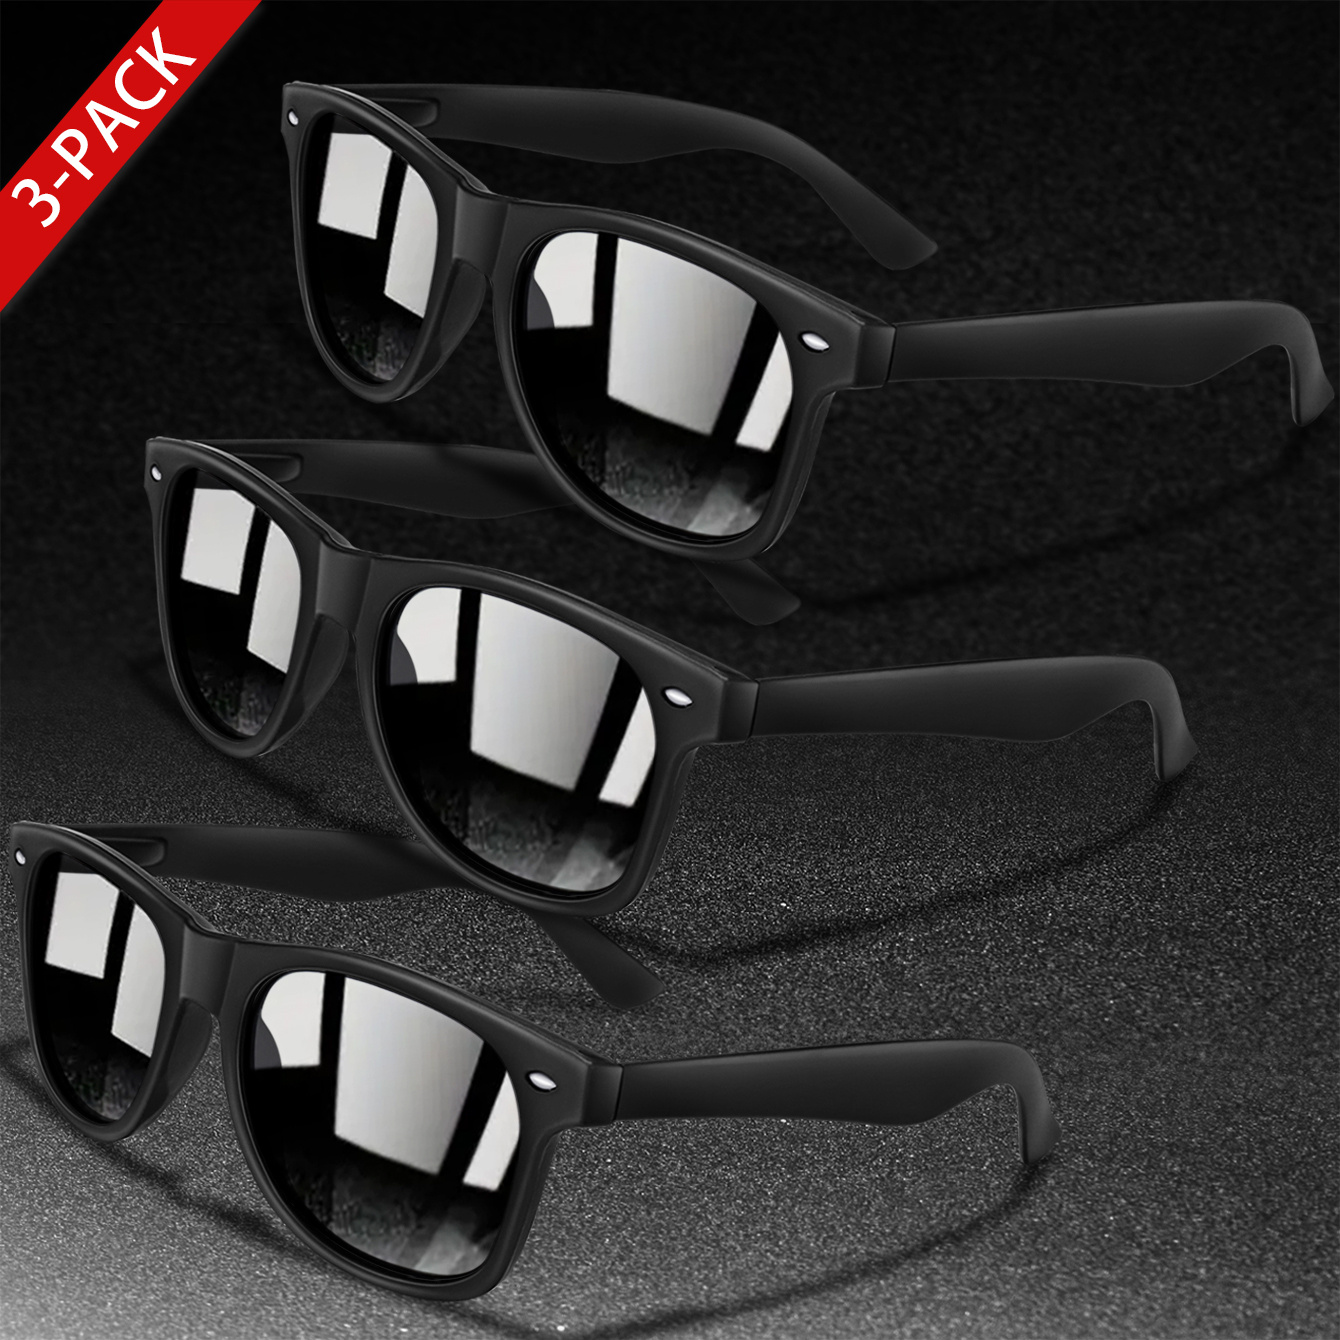 

3 Pairs Of Classic Fashion Glasses With Black, Blue, And Red Lenses And Small Decorations, Ideal For Daily Wear, Driving, And Cycling Casual Wear